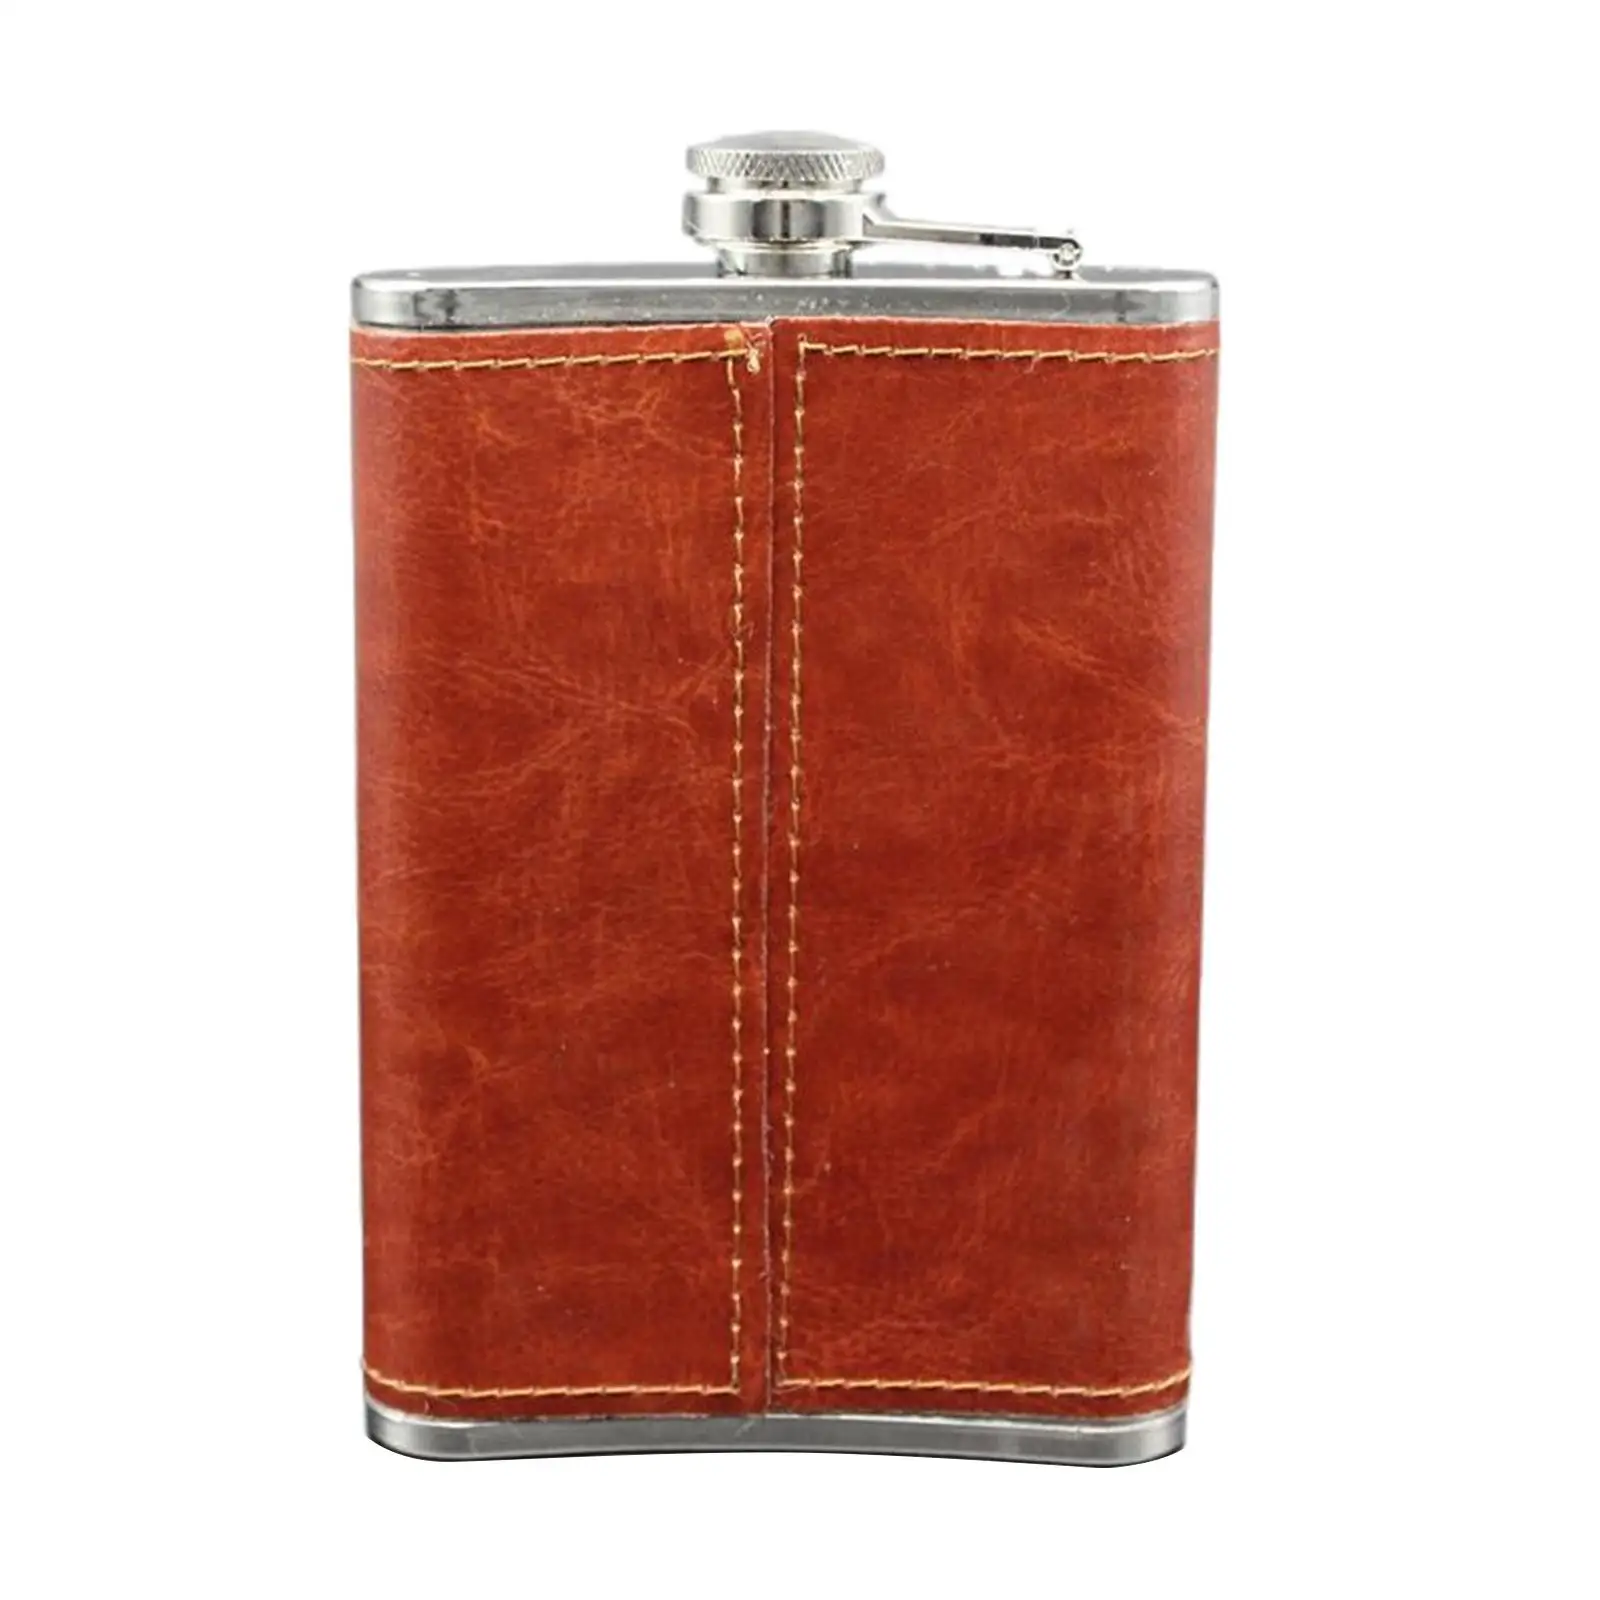 9 oz Hip Flask Leakproof Stainless Steel with PU Leather Wrapped Drinkware for Home Goods Man Gifts Drinker Alcohol 301-400ml